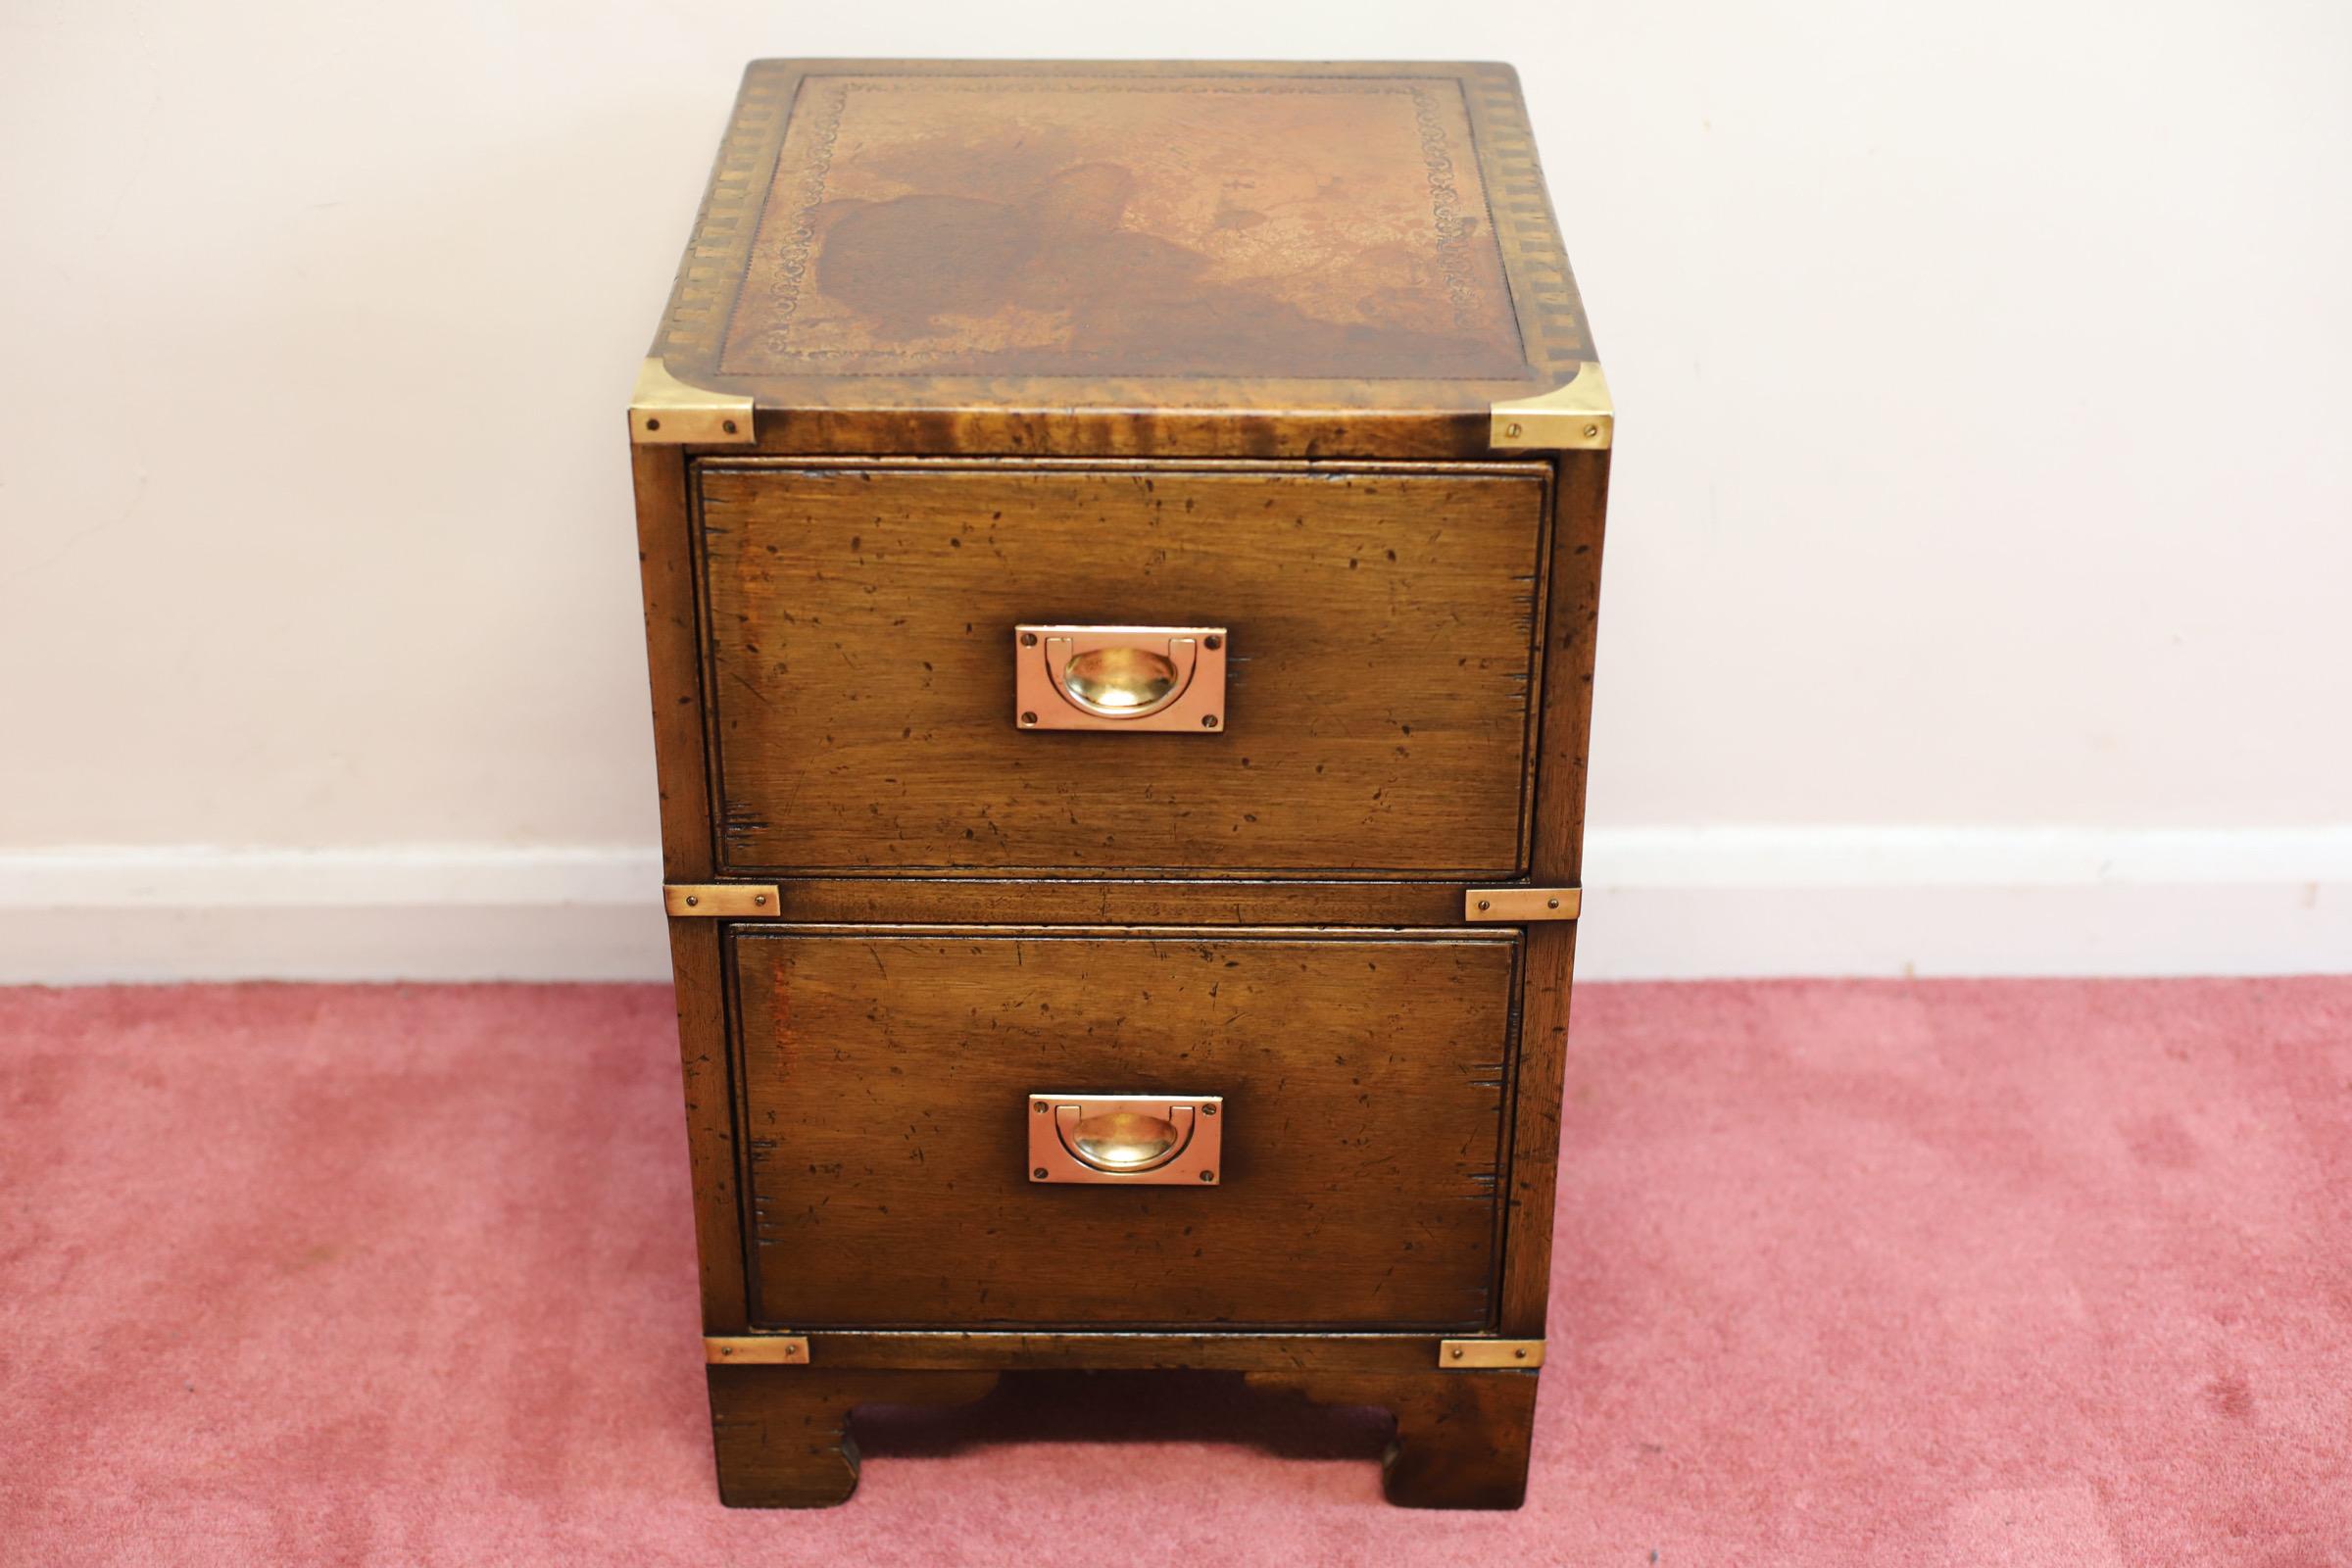 We are delight to offer for sale this antique full of charm campaign style bedside chest with bras corner and inlaid leather top .
Don't hesitate to contact me if you have any questions.
Please have a closer look at the pictures because they form